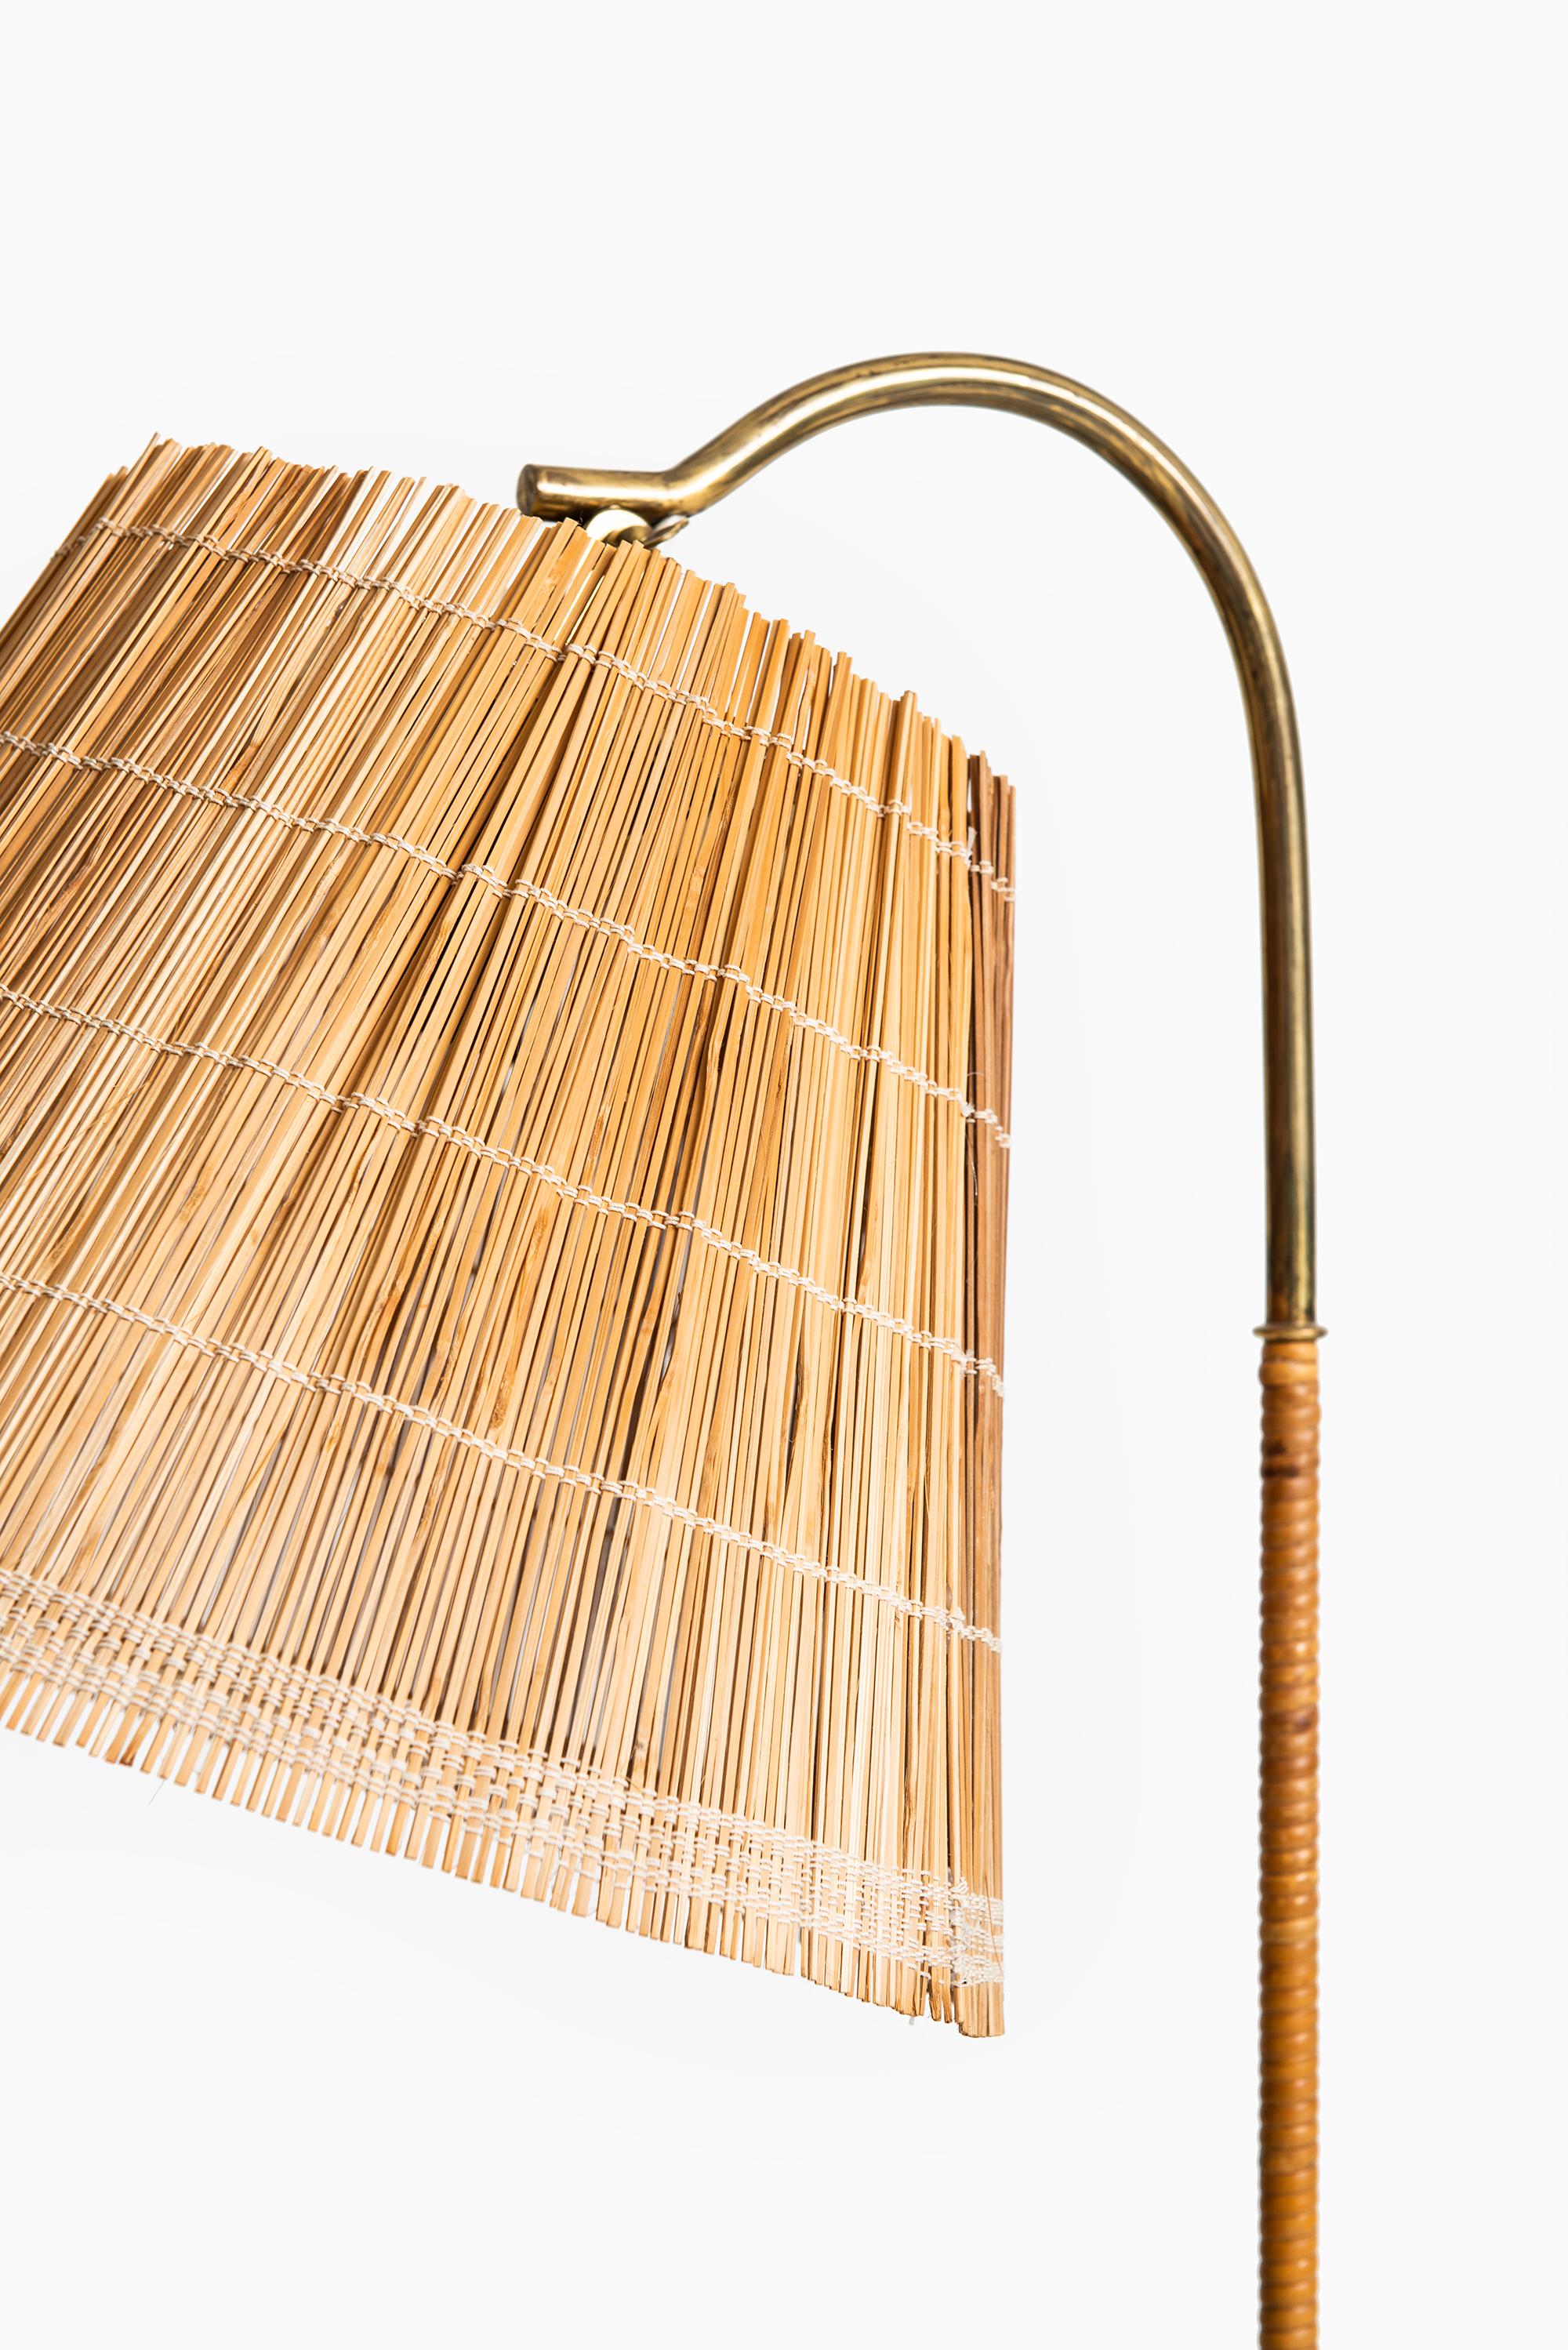 Finnish Paavo Tynell Floor Lamps Produced by Taito Oy in Finland